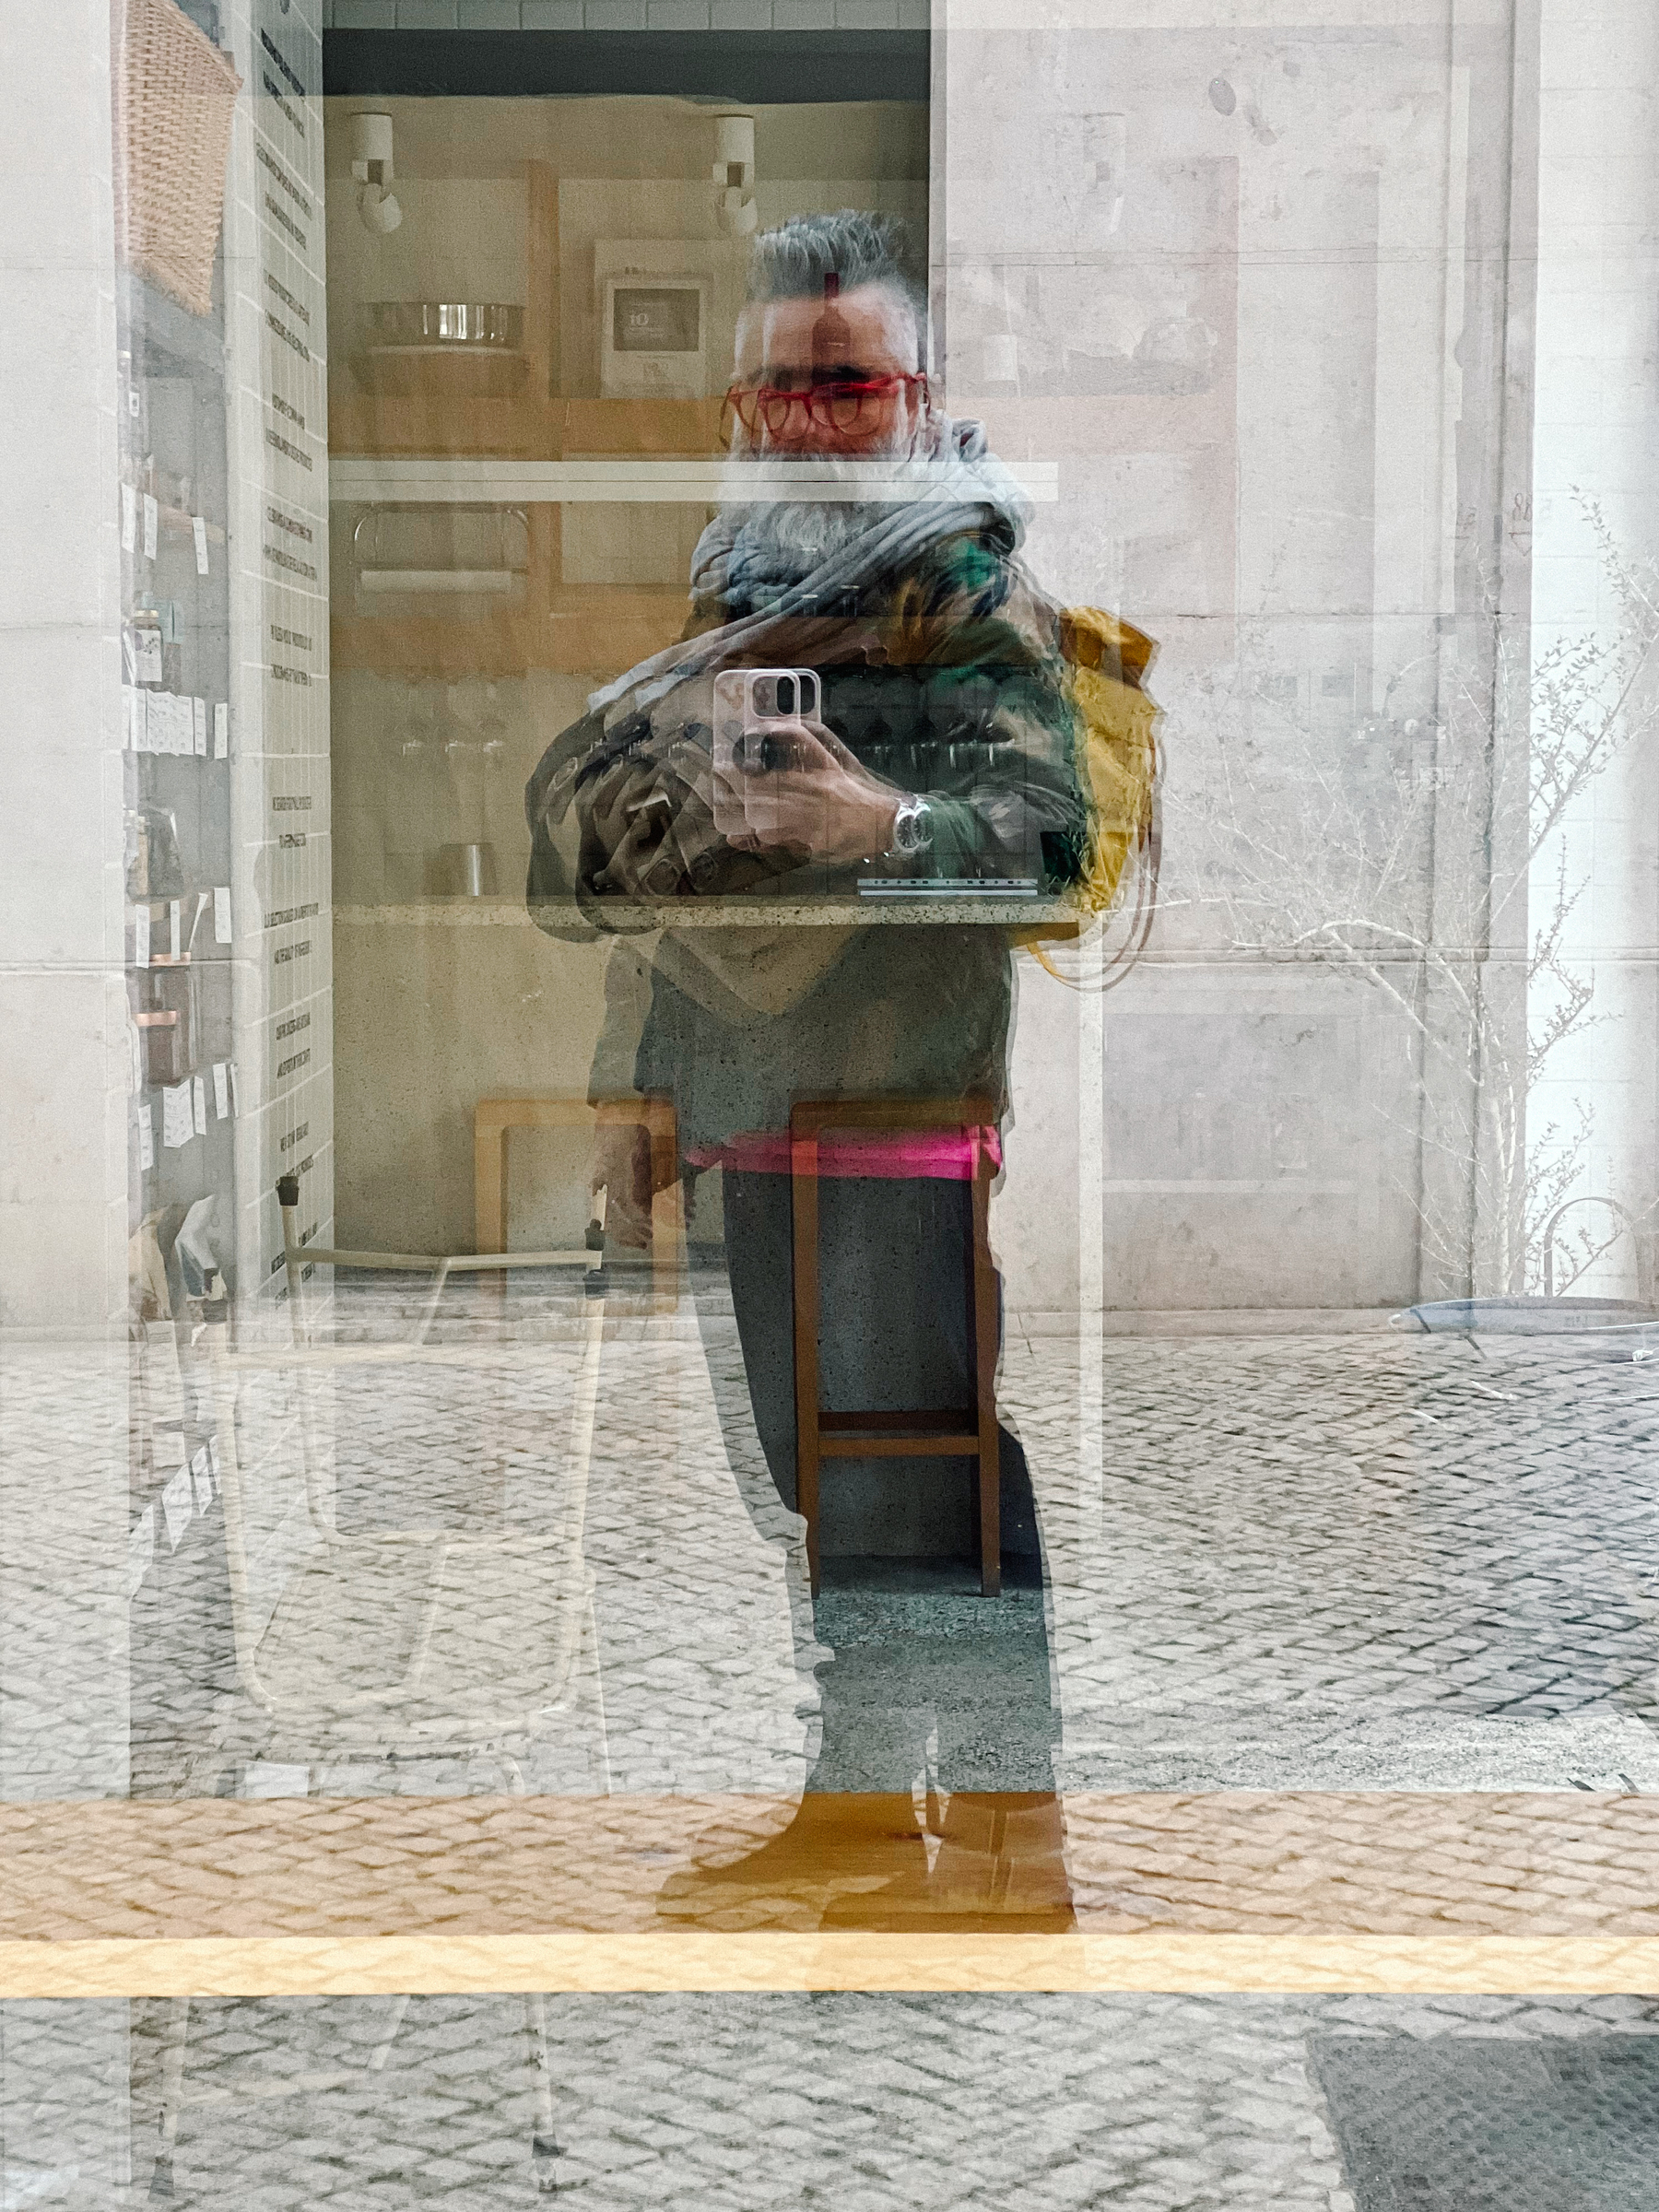 Self portrait, reflected on a shop window. Backpack on the back, camera bag in front. 